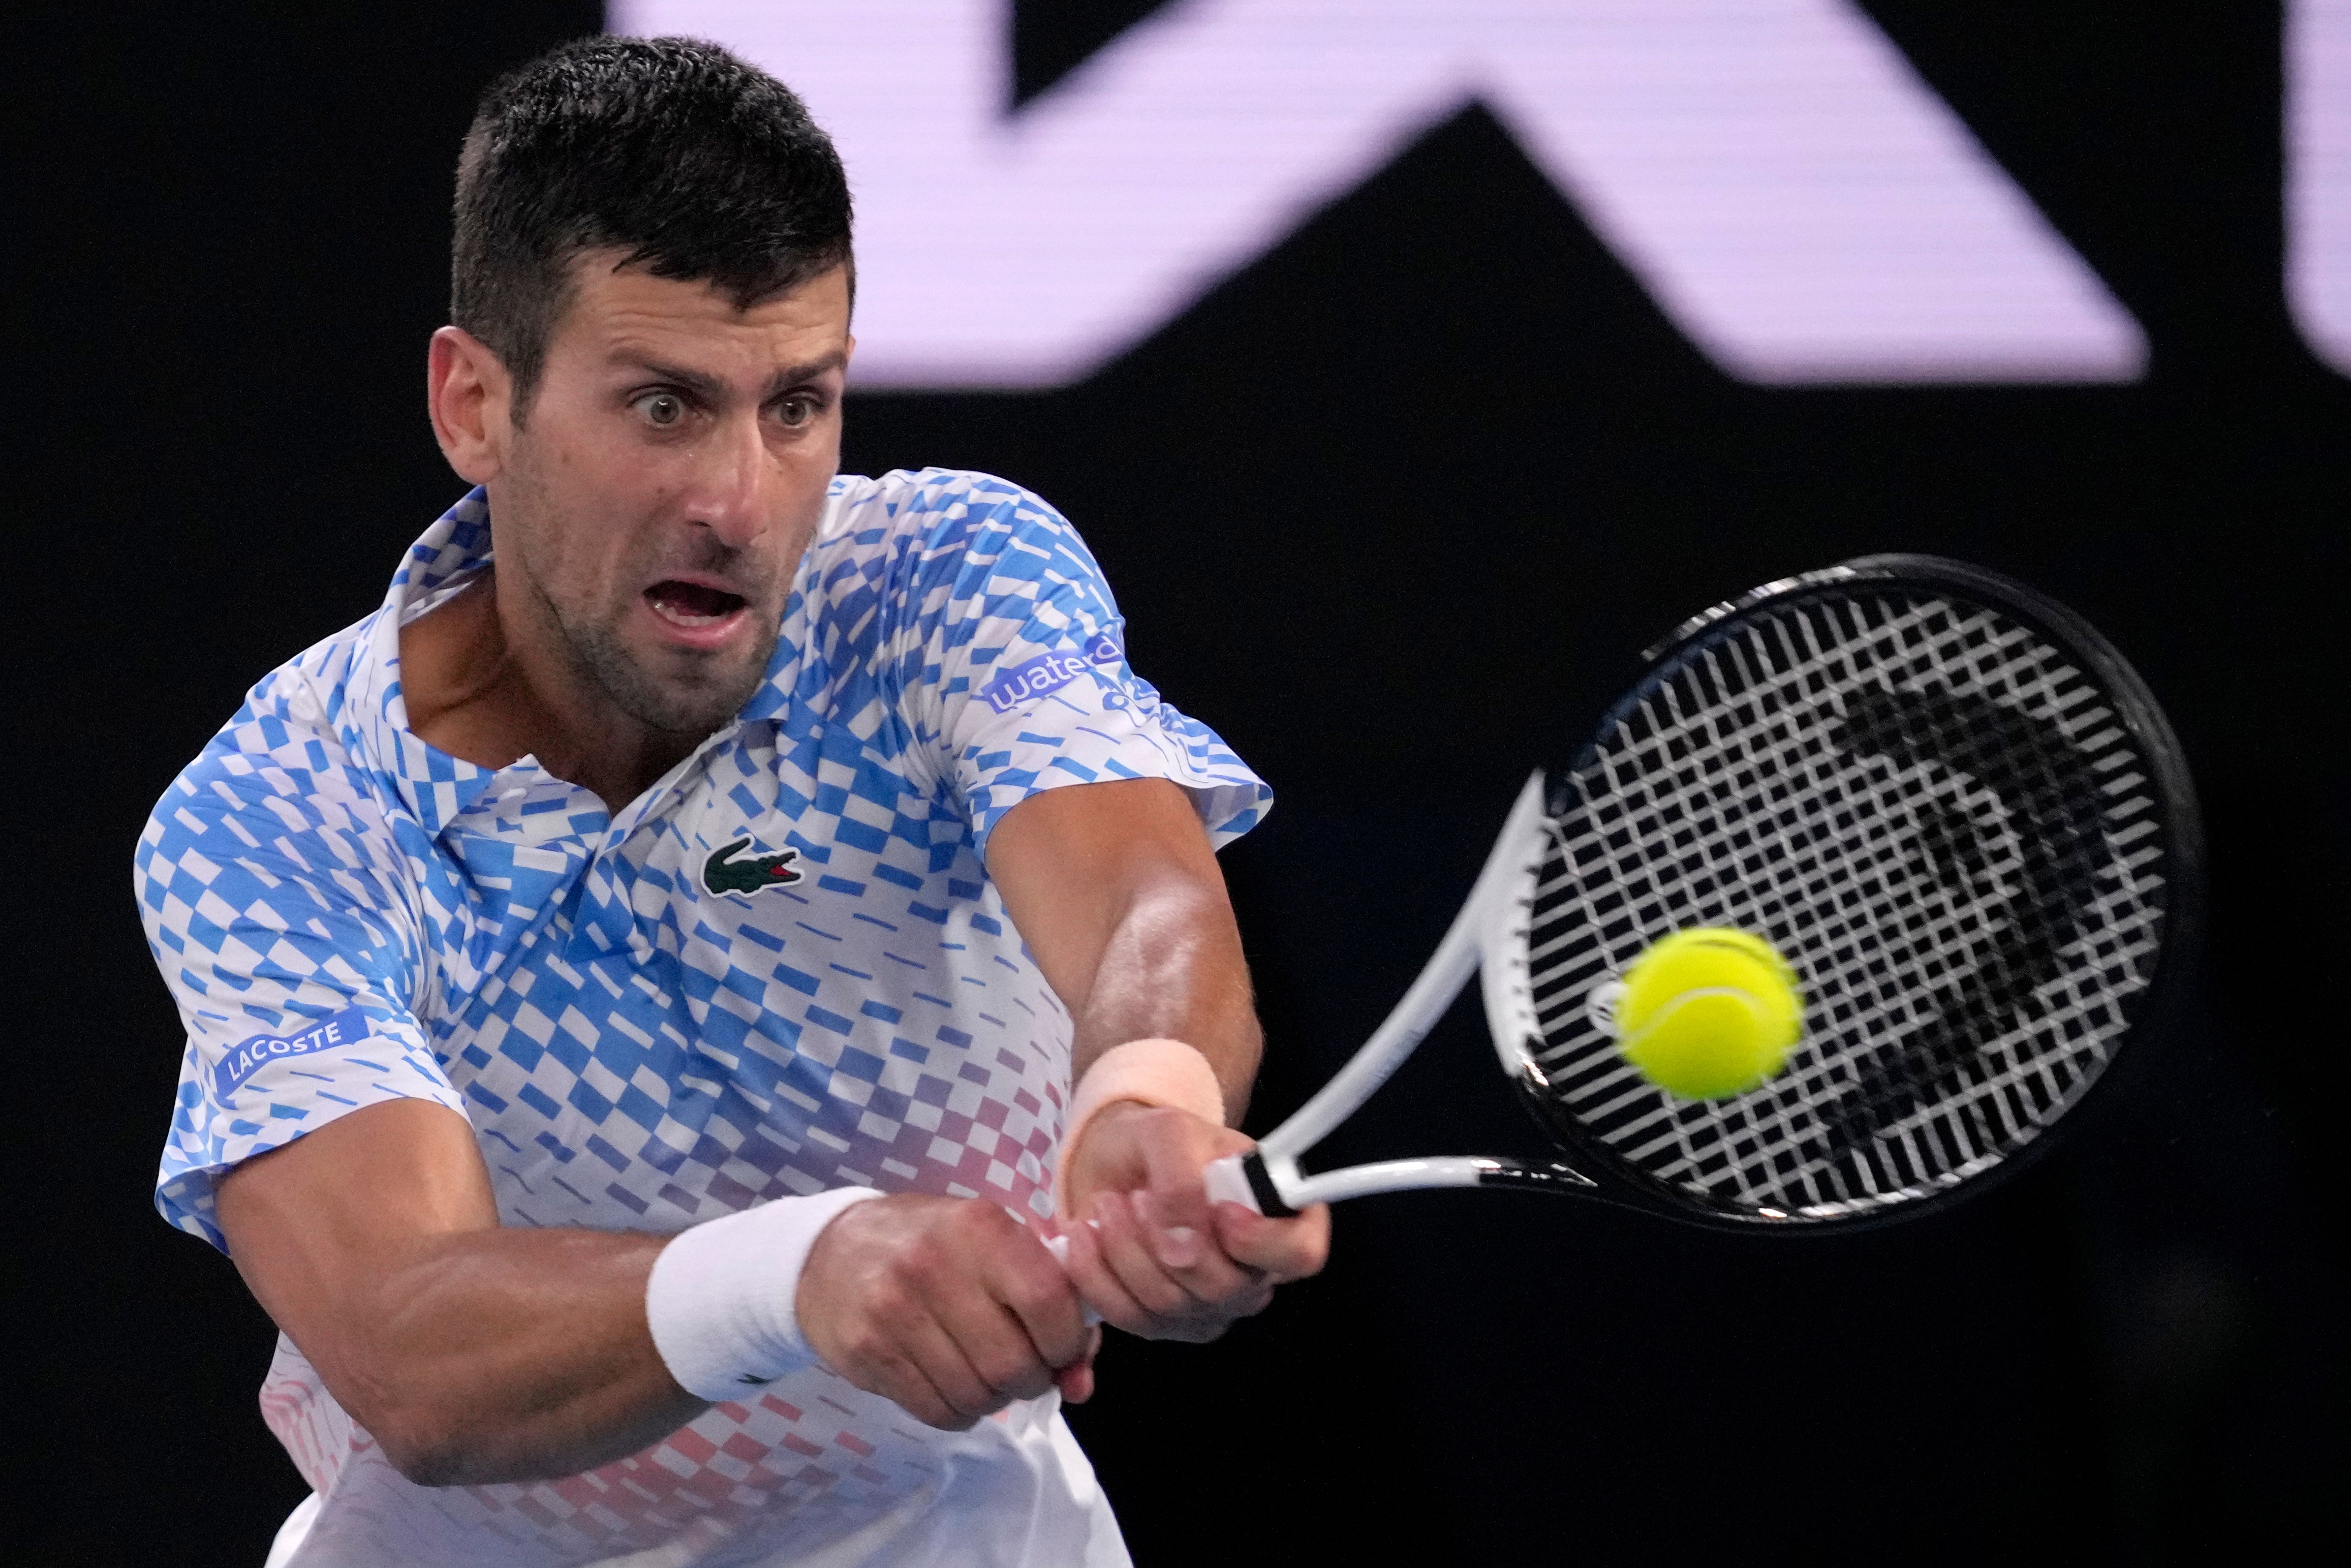 Djokovic wins 2023 Australian Open mens singles final with sweep of Tsitsipas, claims 10th title